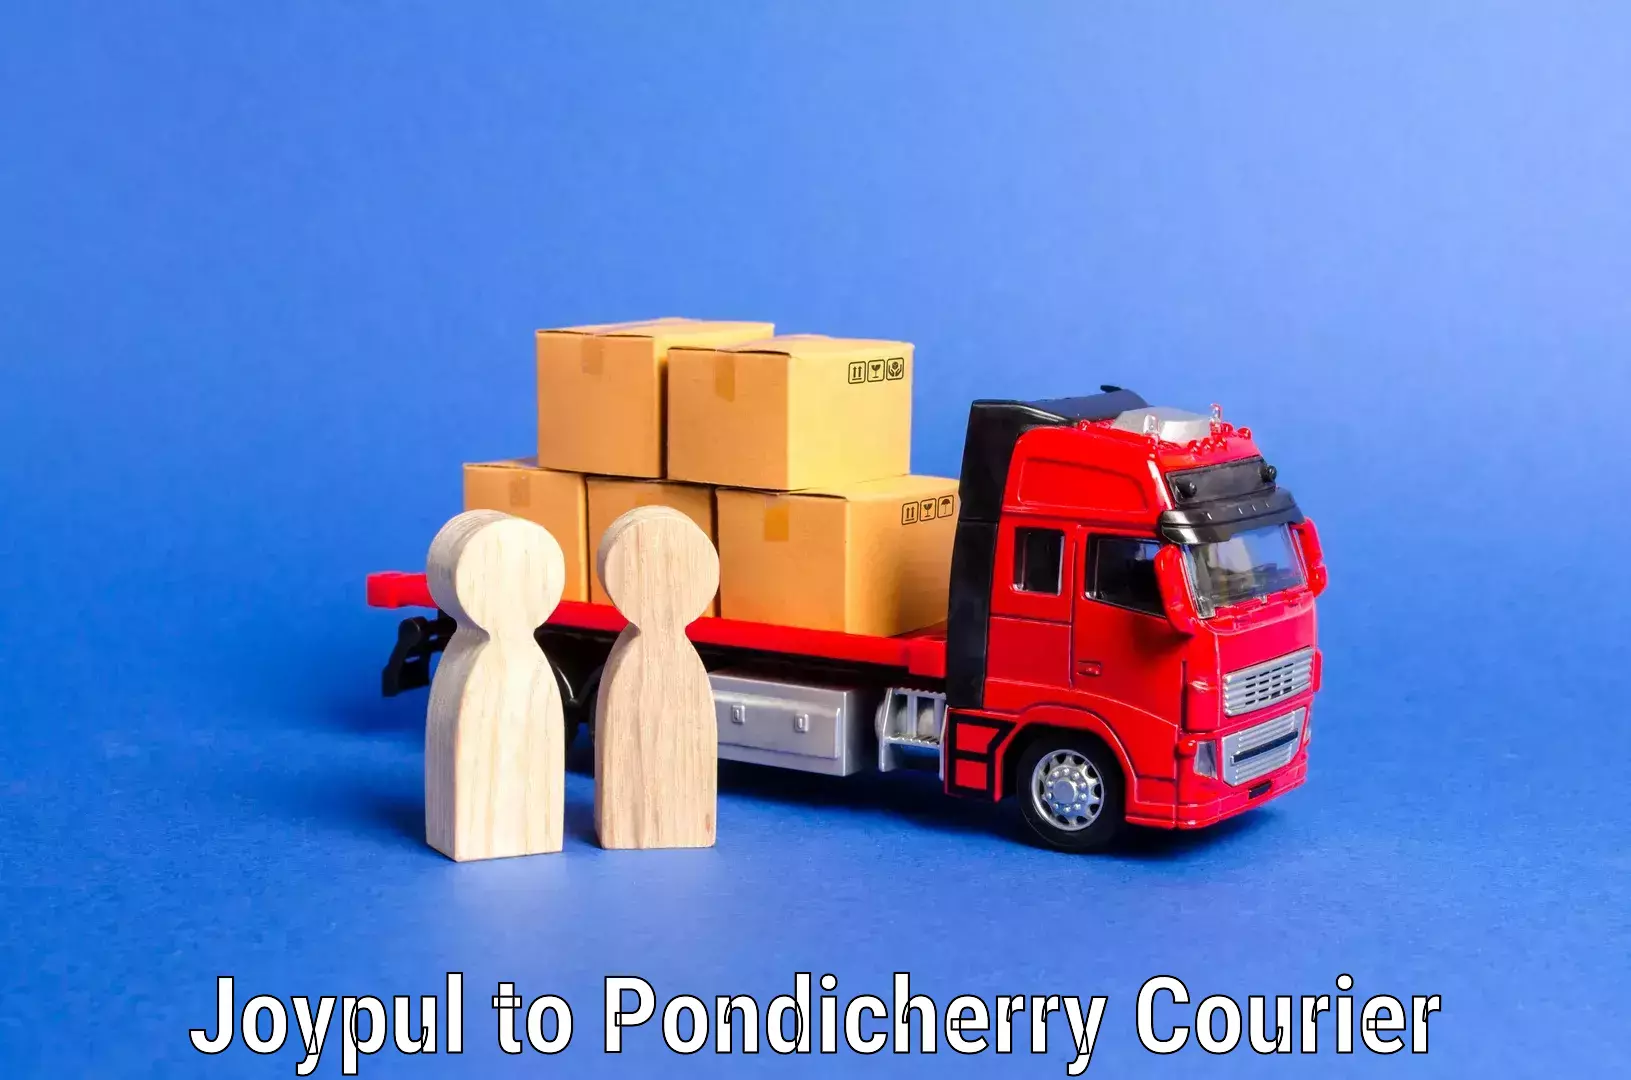 Trusted relocation experts Joypul to Pondicherry